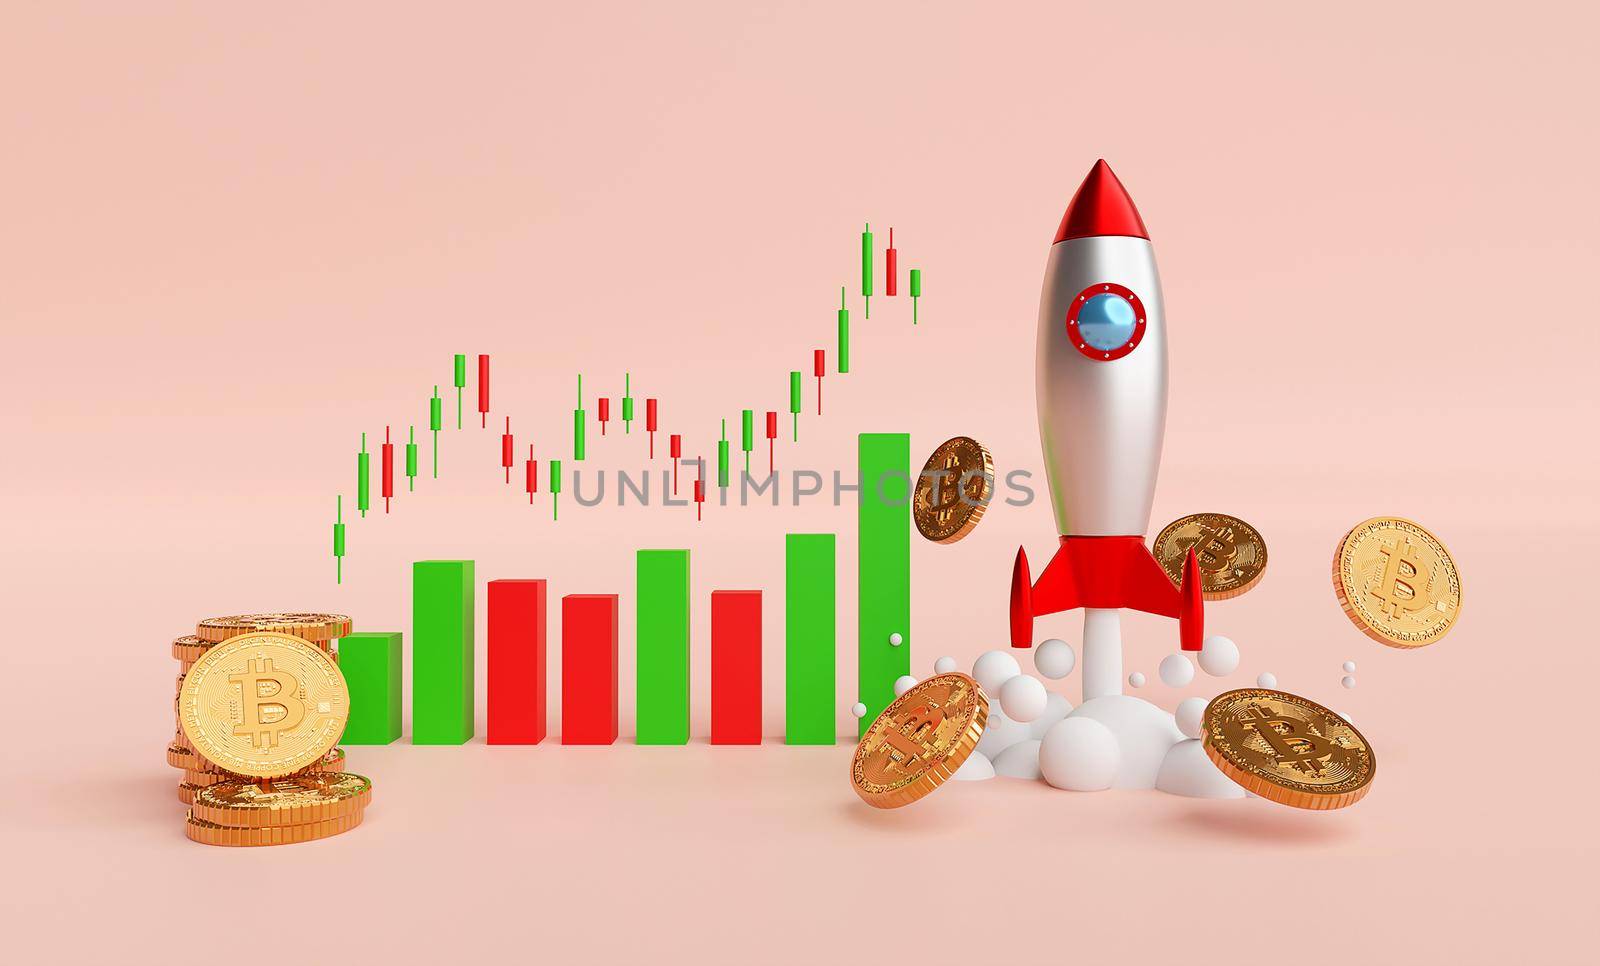 Rocket launching and BTC bitcoin with candle graph chart, 3d illustration by nutzchotwarut